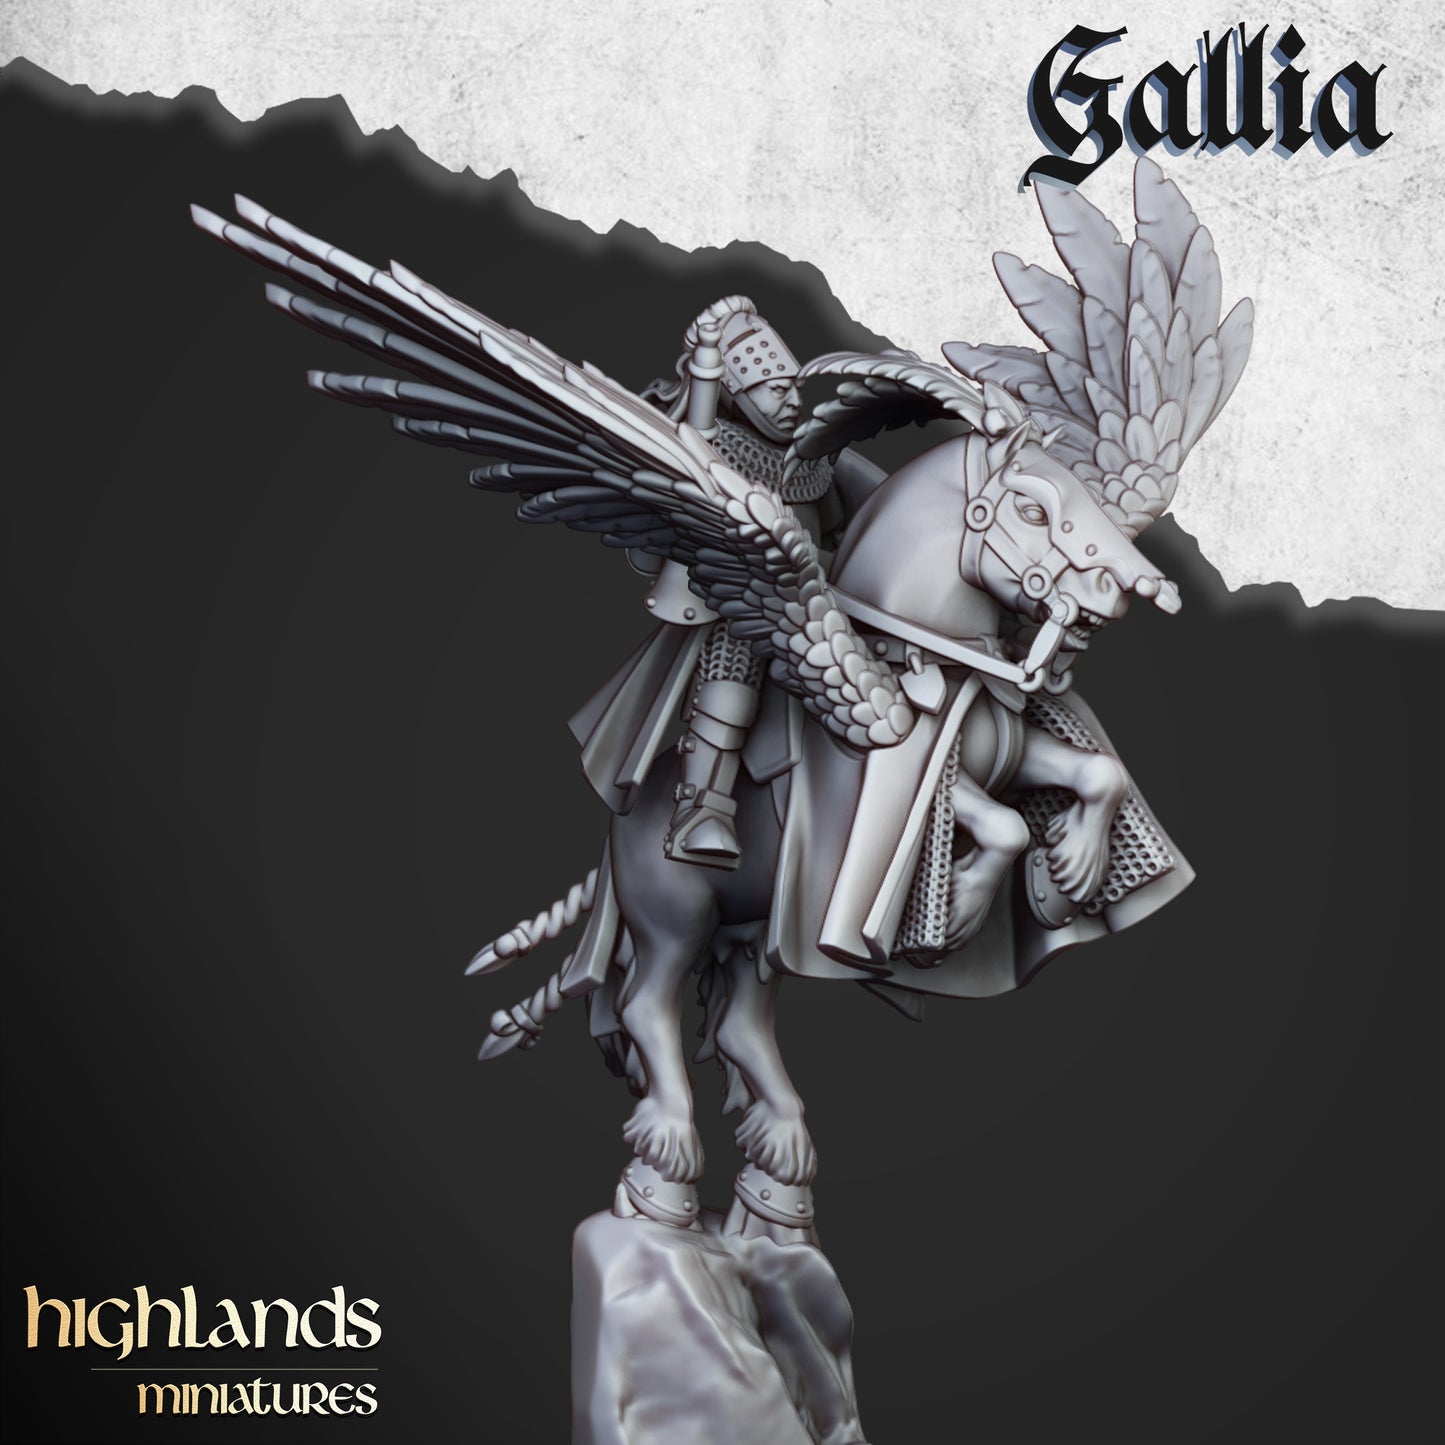 Gallia Knights on Pegasus by Highlands Miniatures.